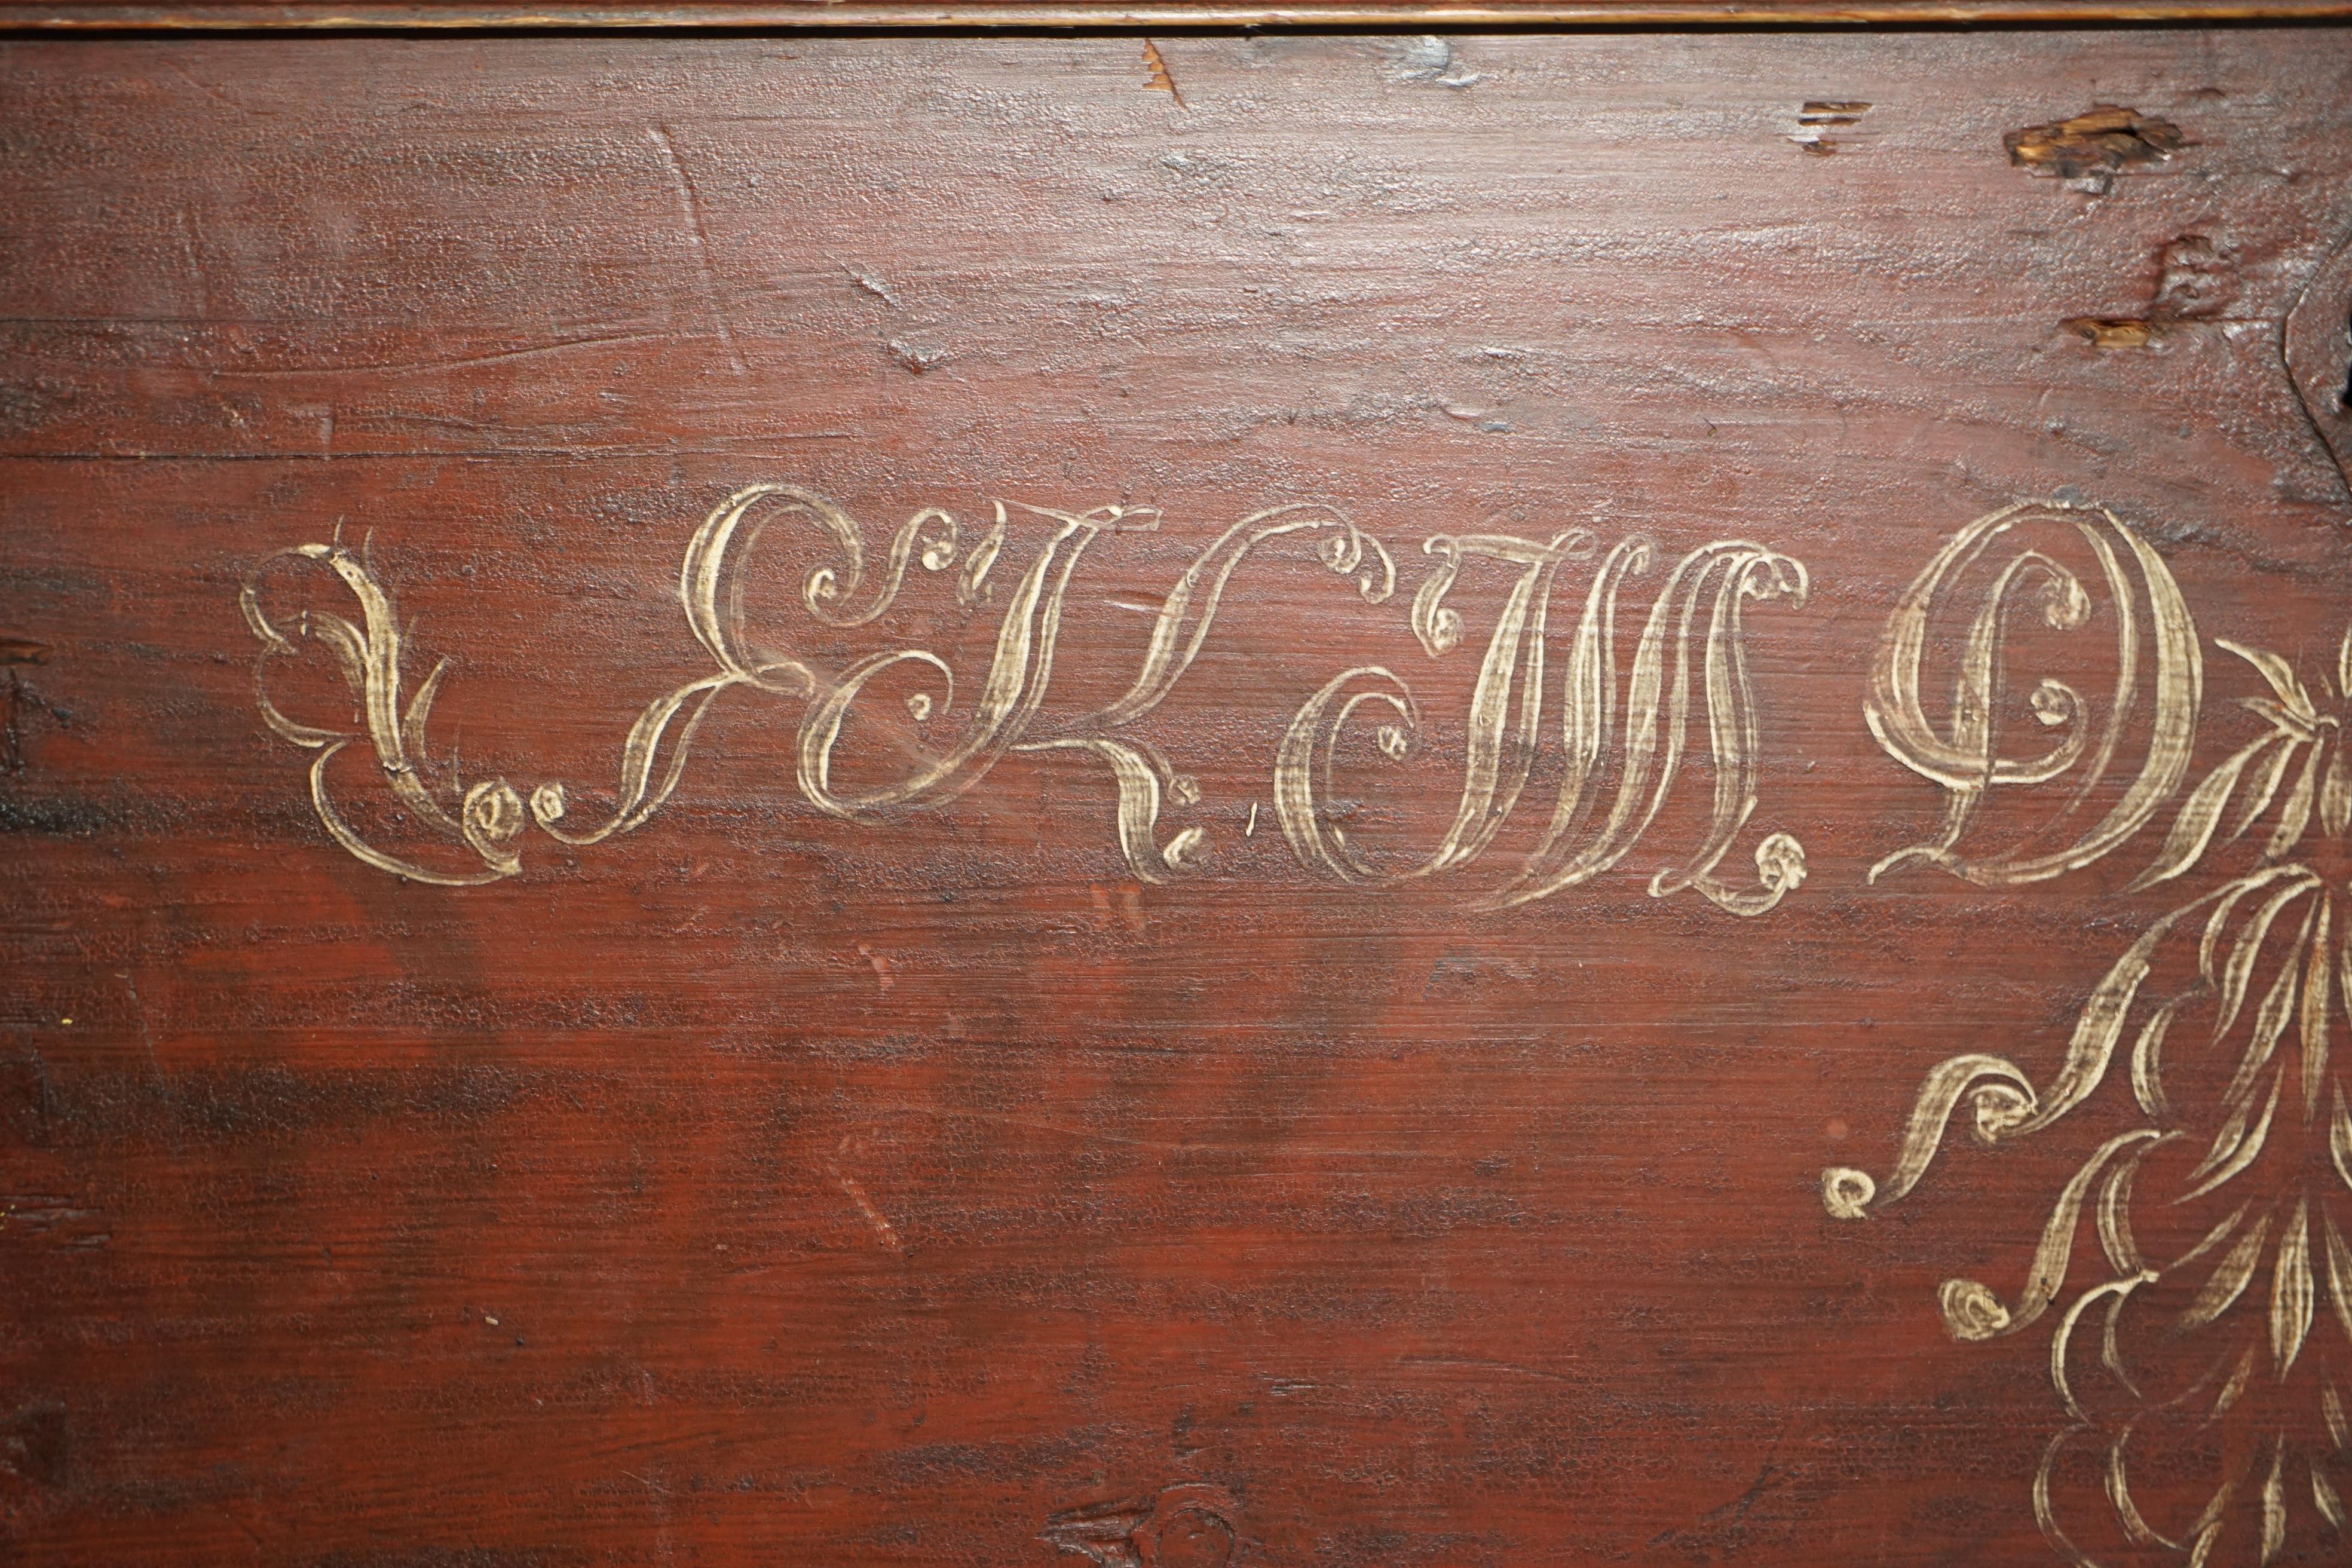 George III Sublime 1844 Dated Hand Painted Swedish Chest or Trunk for Linens Coffee Table For Sale